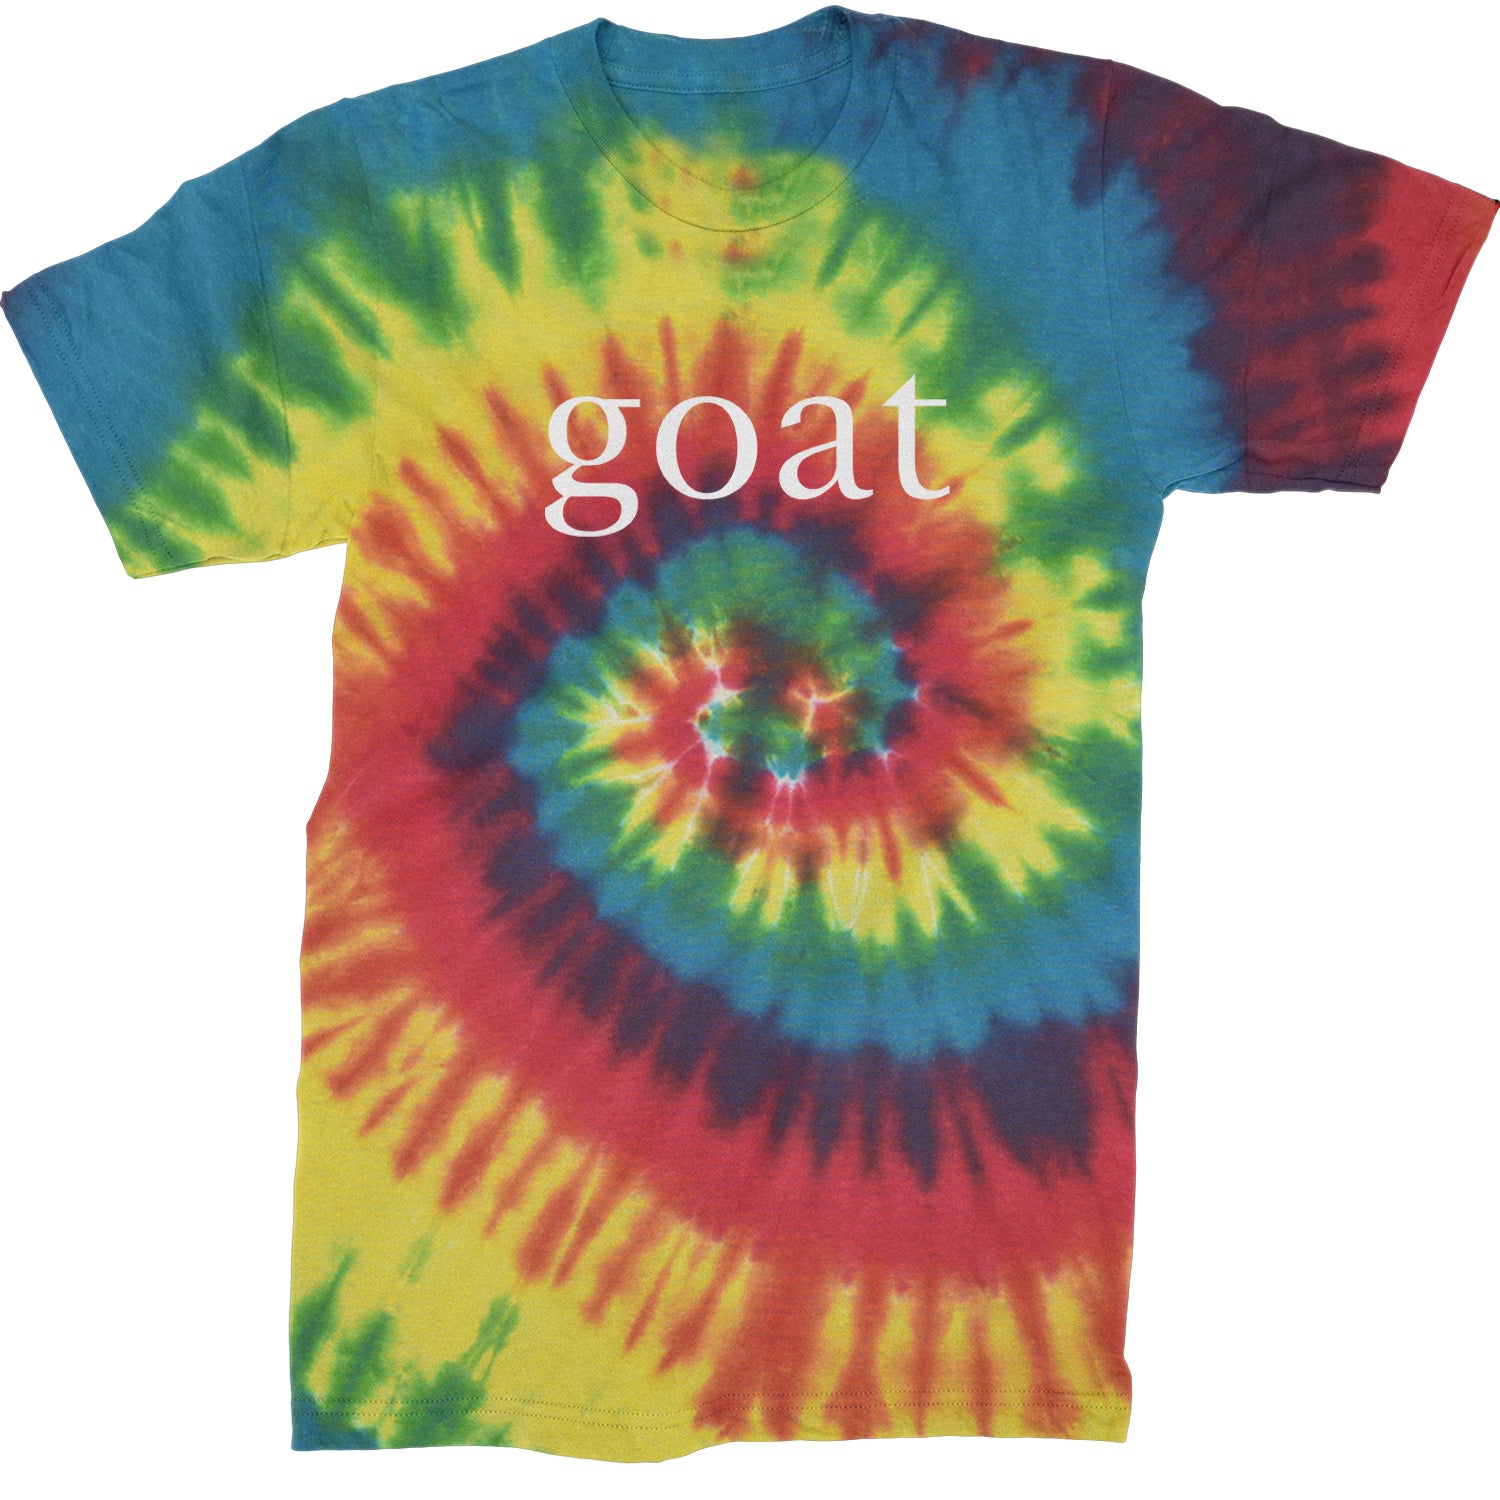 GOAT - Greatest Of All Time  Mens T-shirt Tie-Dye Rainbow Reactive